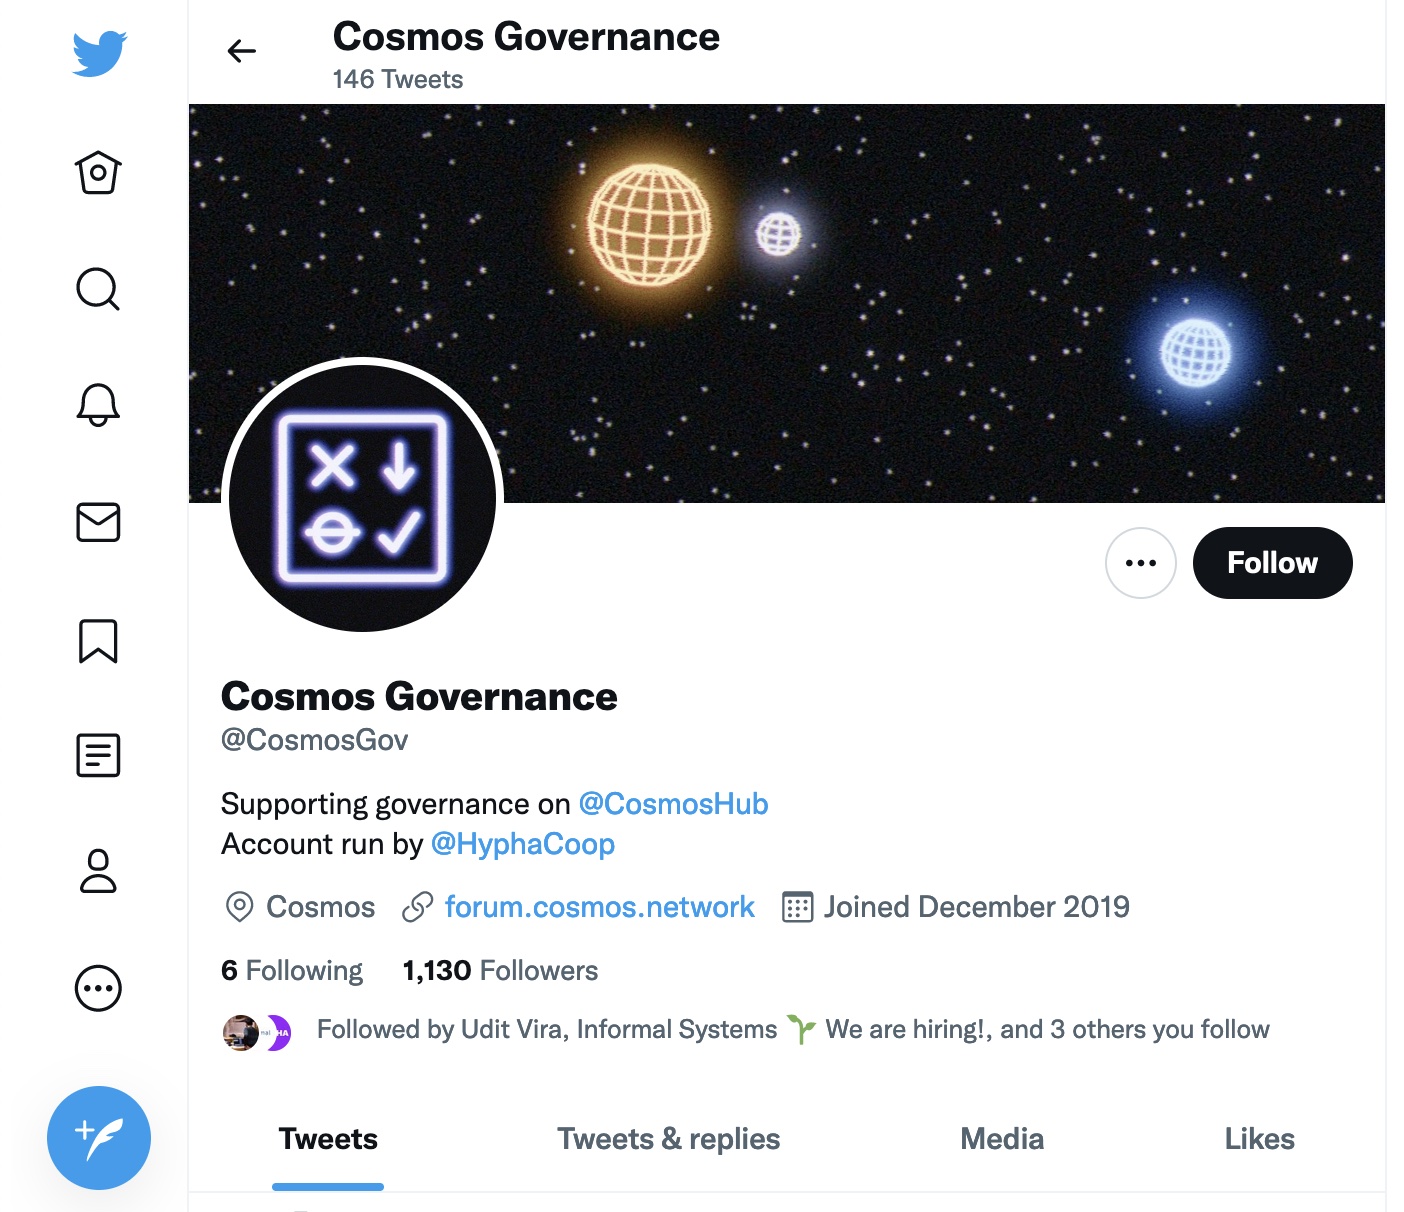 Screenshot of the Cosmos Governance Twitter account